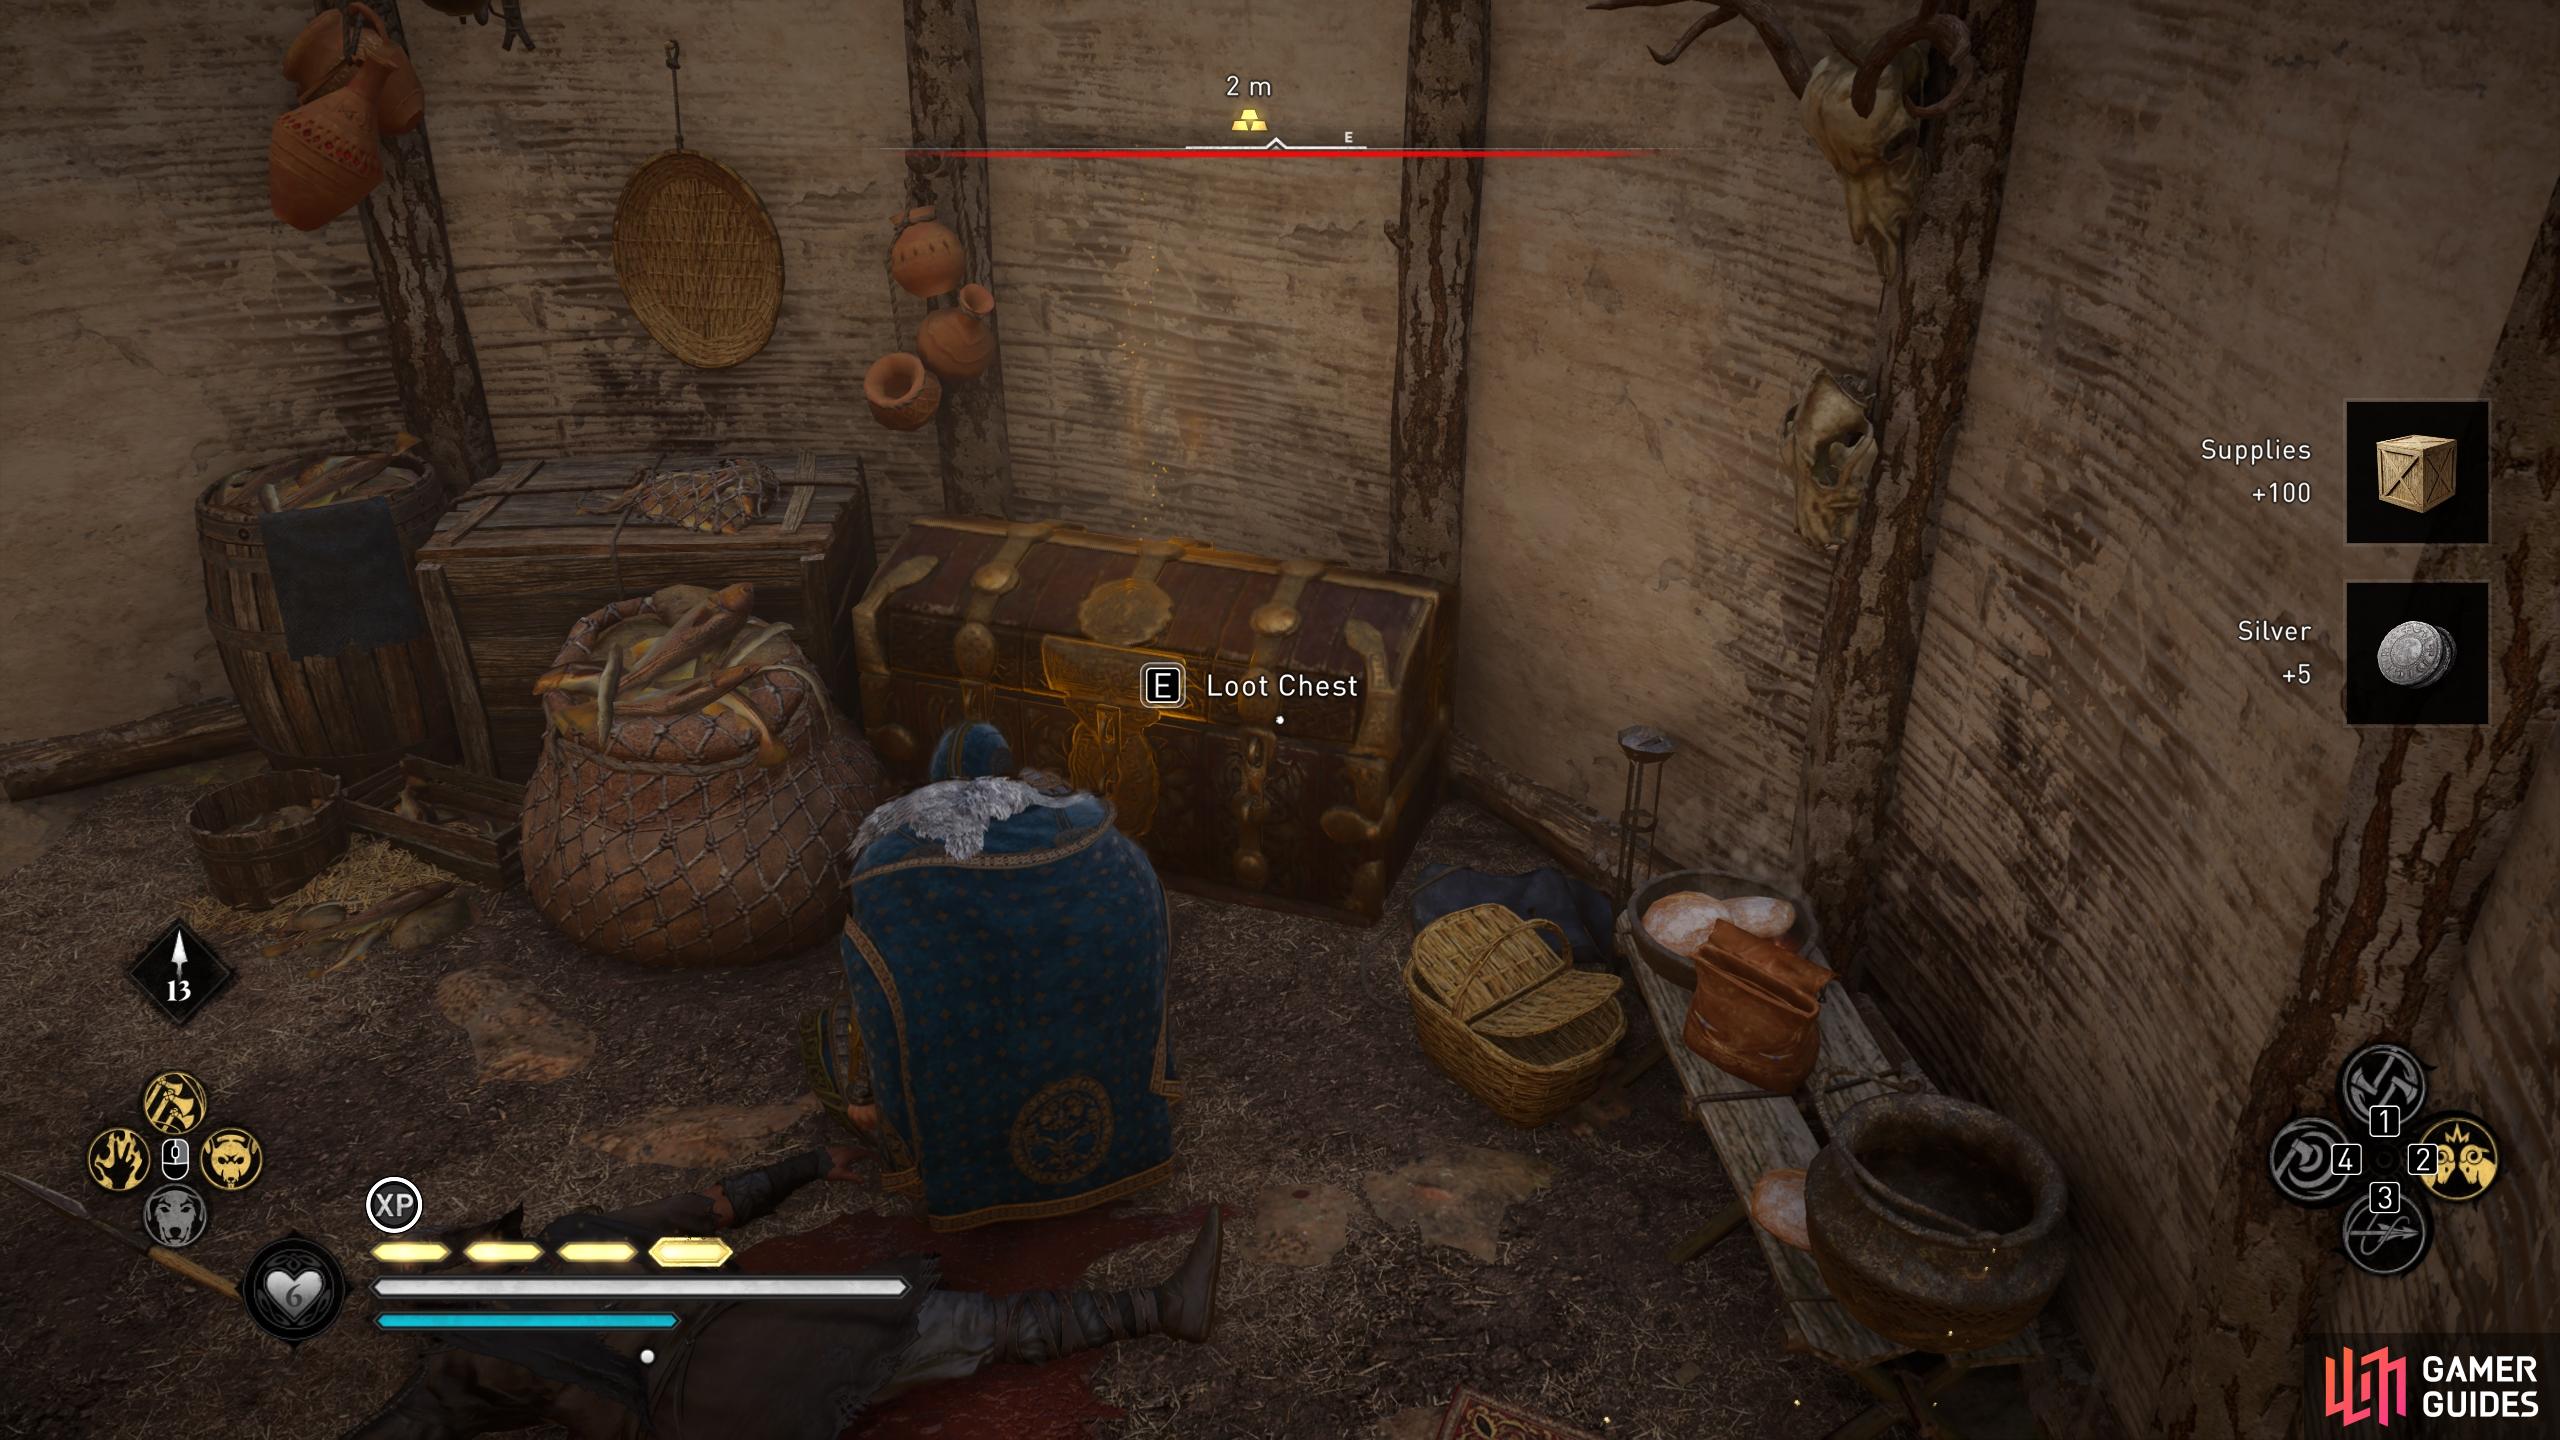 The chest can be found in a roundhouse within the camp.